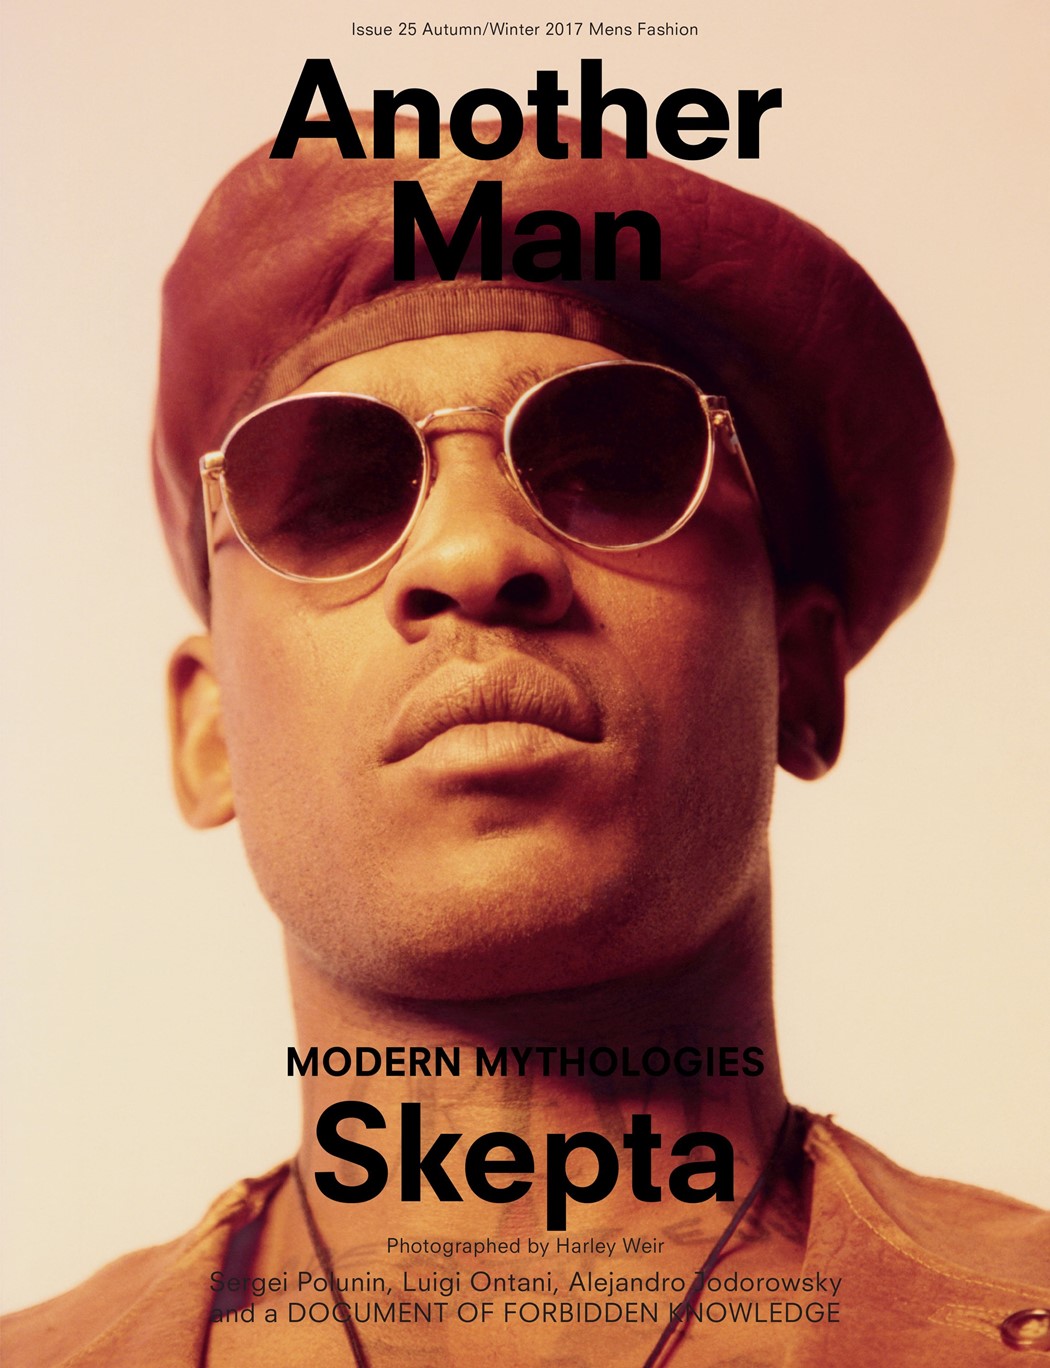 Another Man Skepta cover Harley Weir Alister Mackie 2017